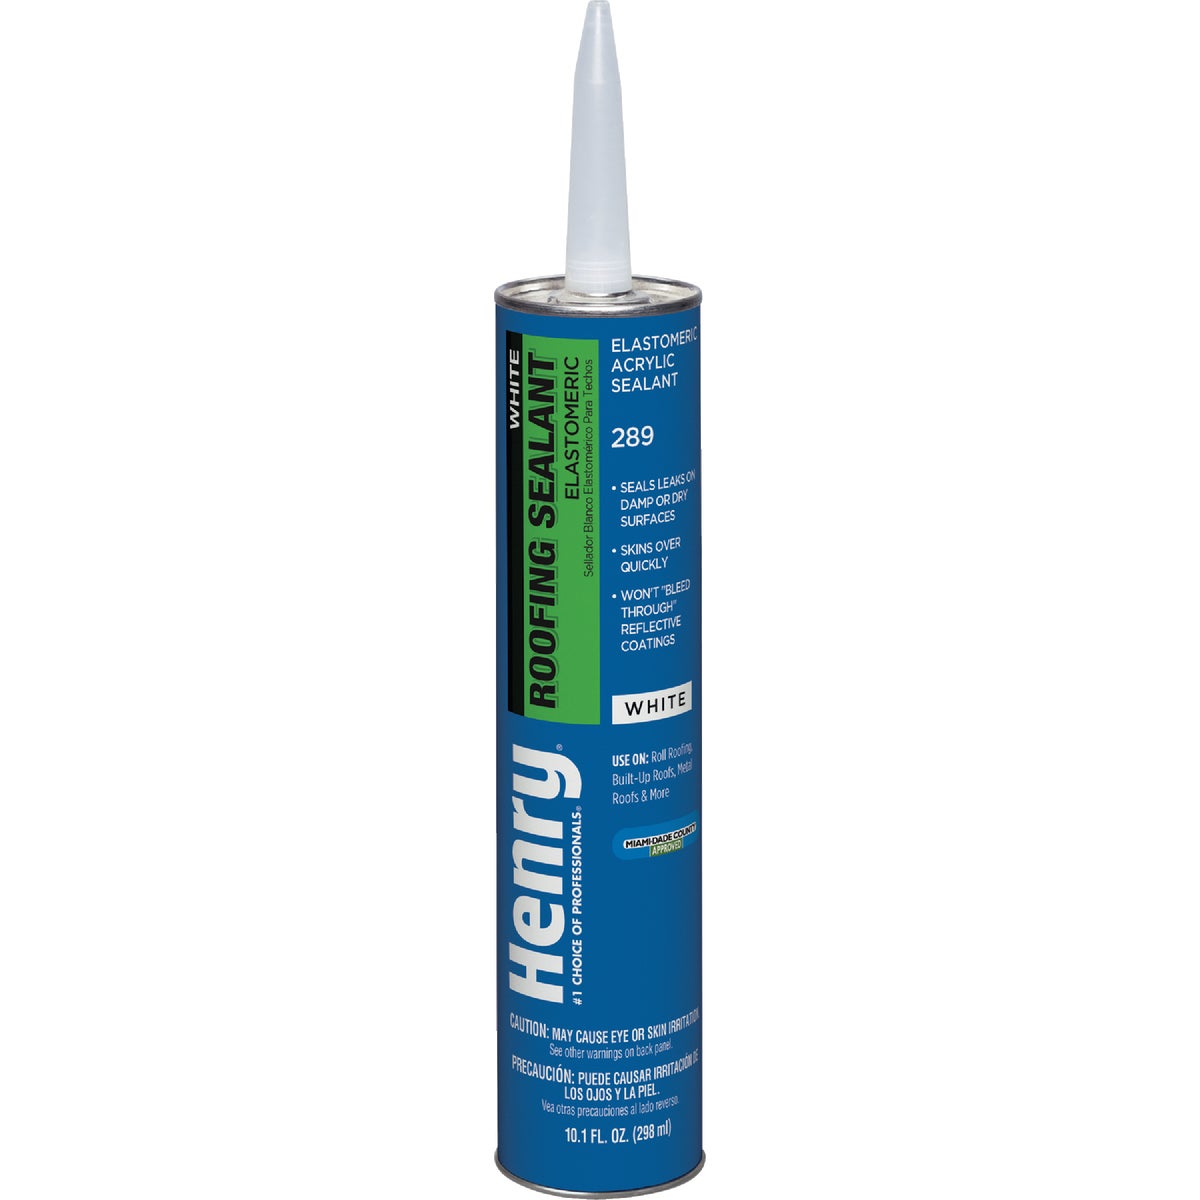 Item 103355, White elastomeric acrylic patching compound specially formulated for 